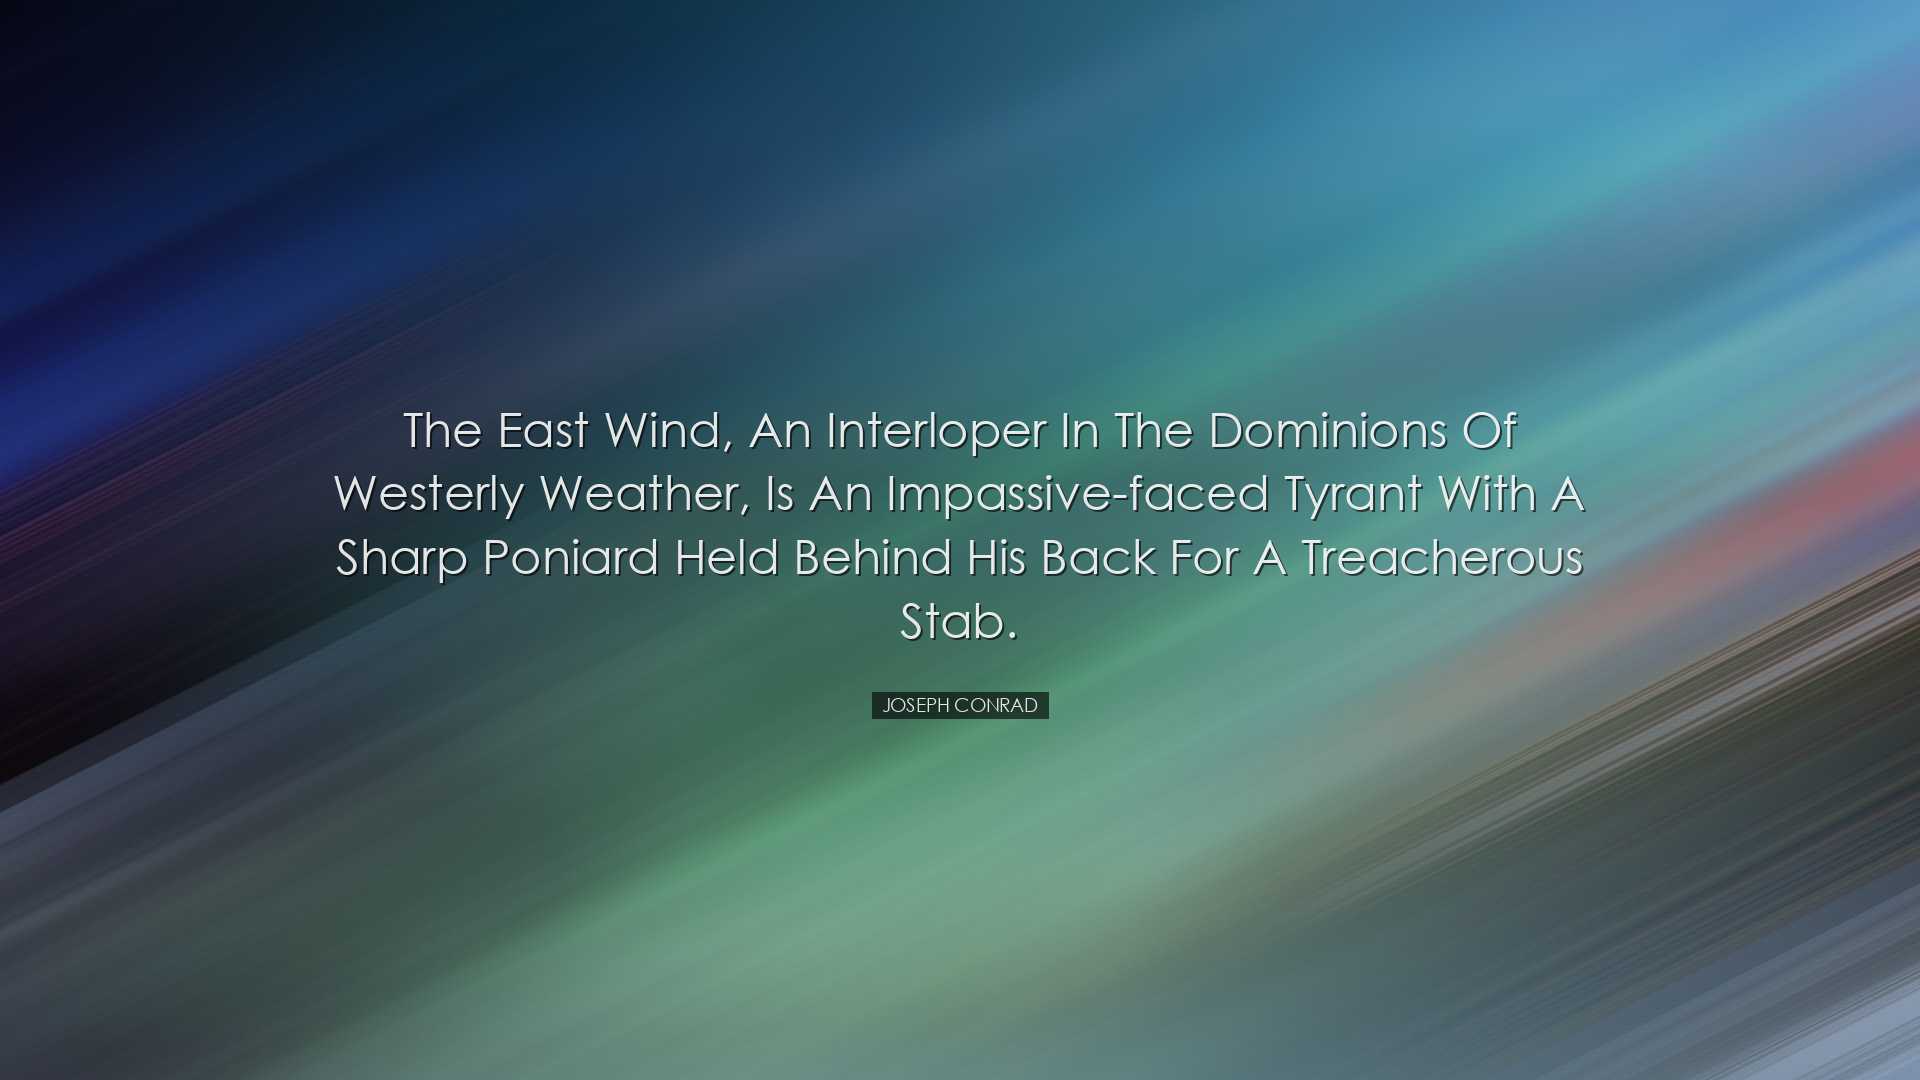 The East Wind, an interloper in the dominions of Westerly Weather,